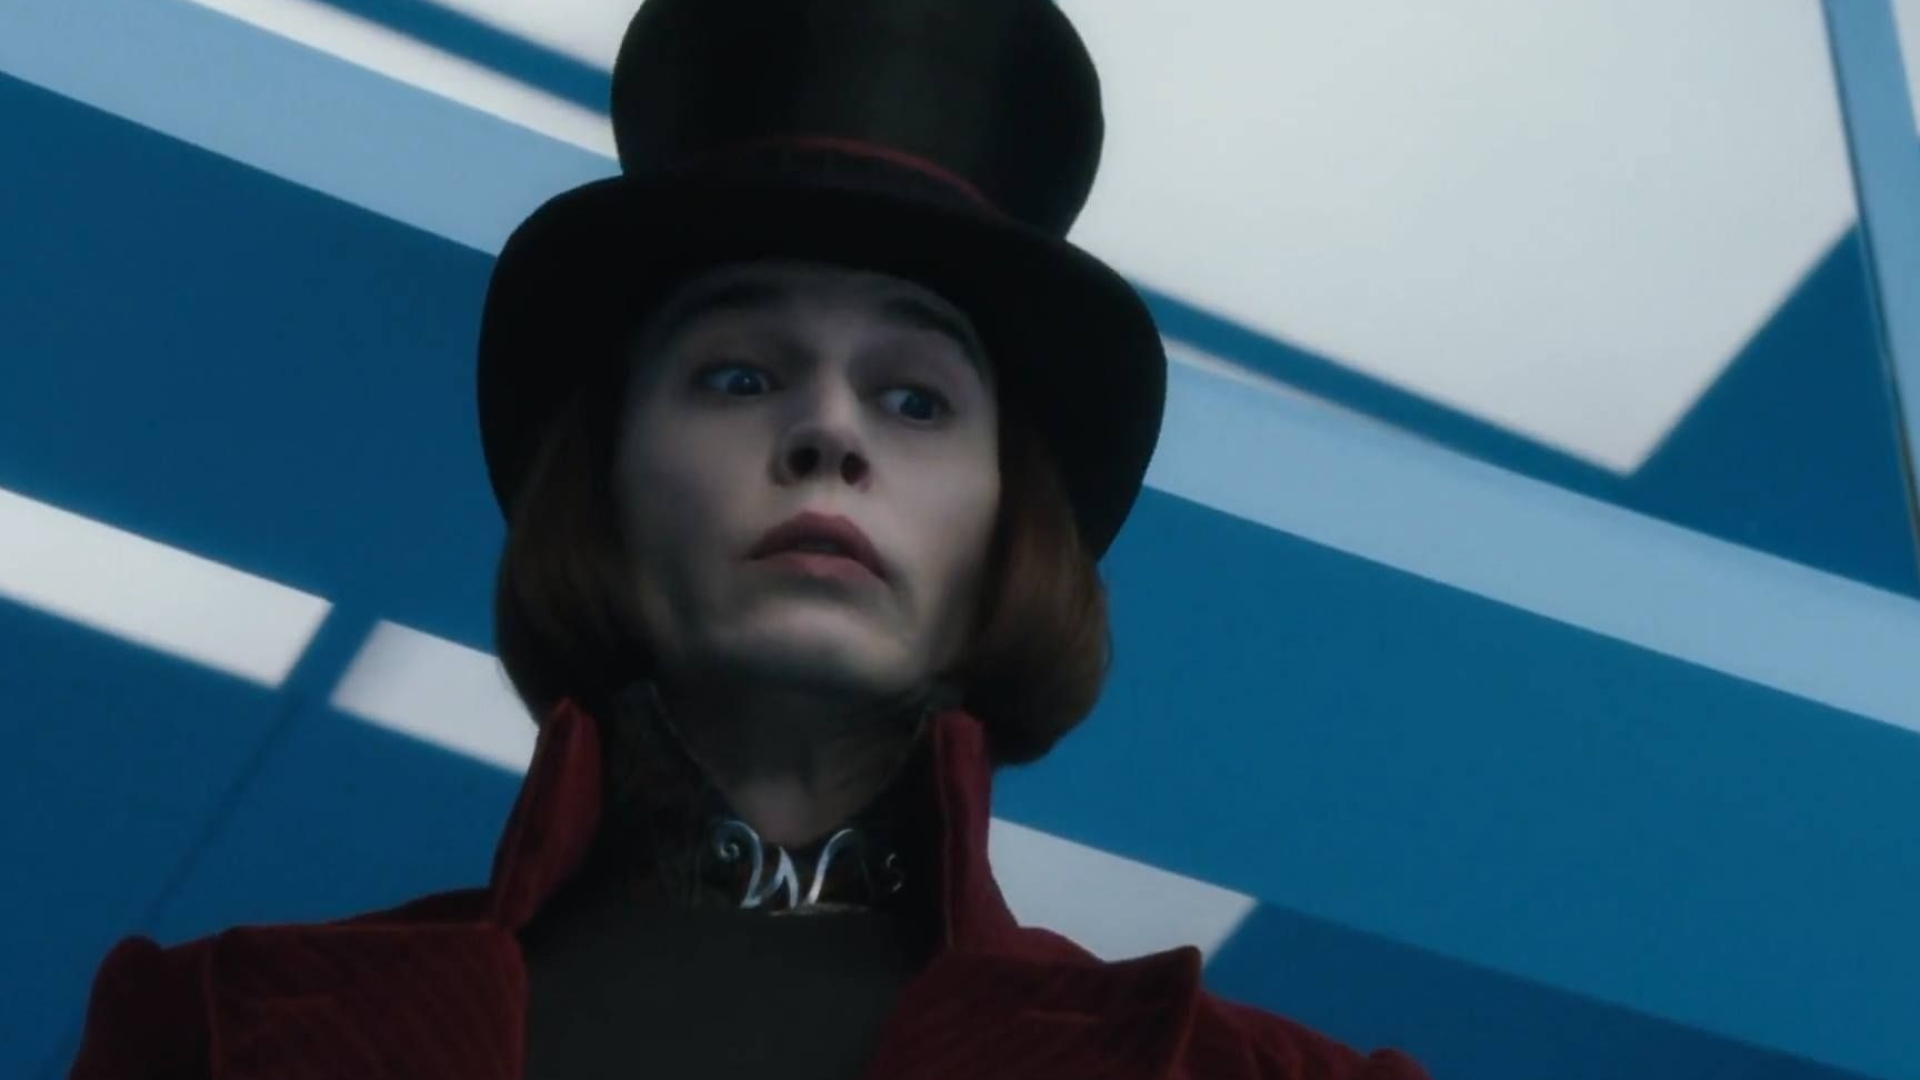 Johnny Depp as Willy Wonka, Quirky character, Classic film adaptation, Memorable performance, 1920x1080 Full HD Desktop